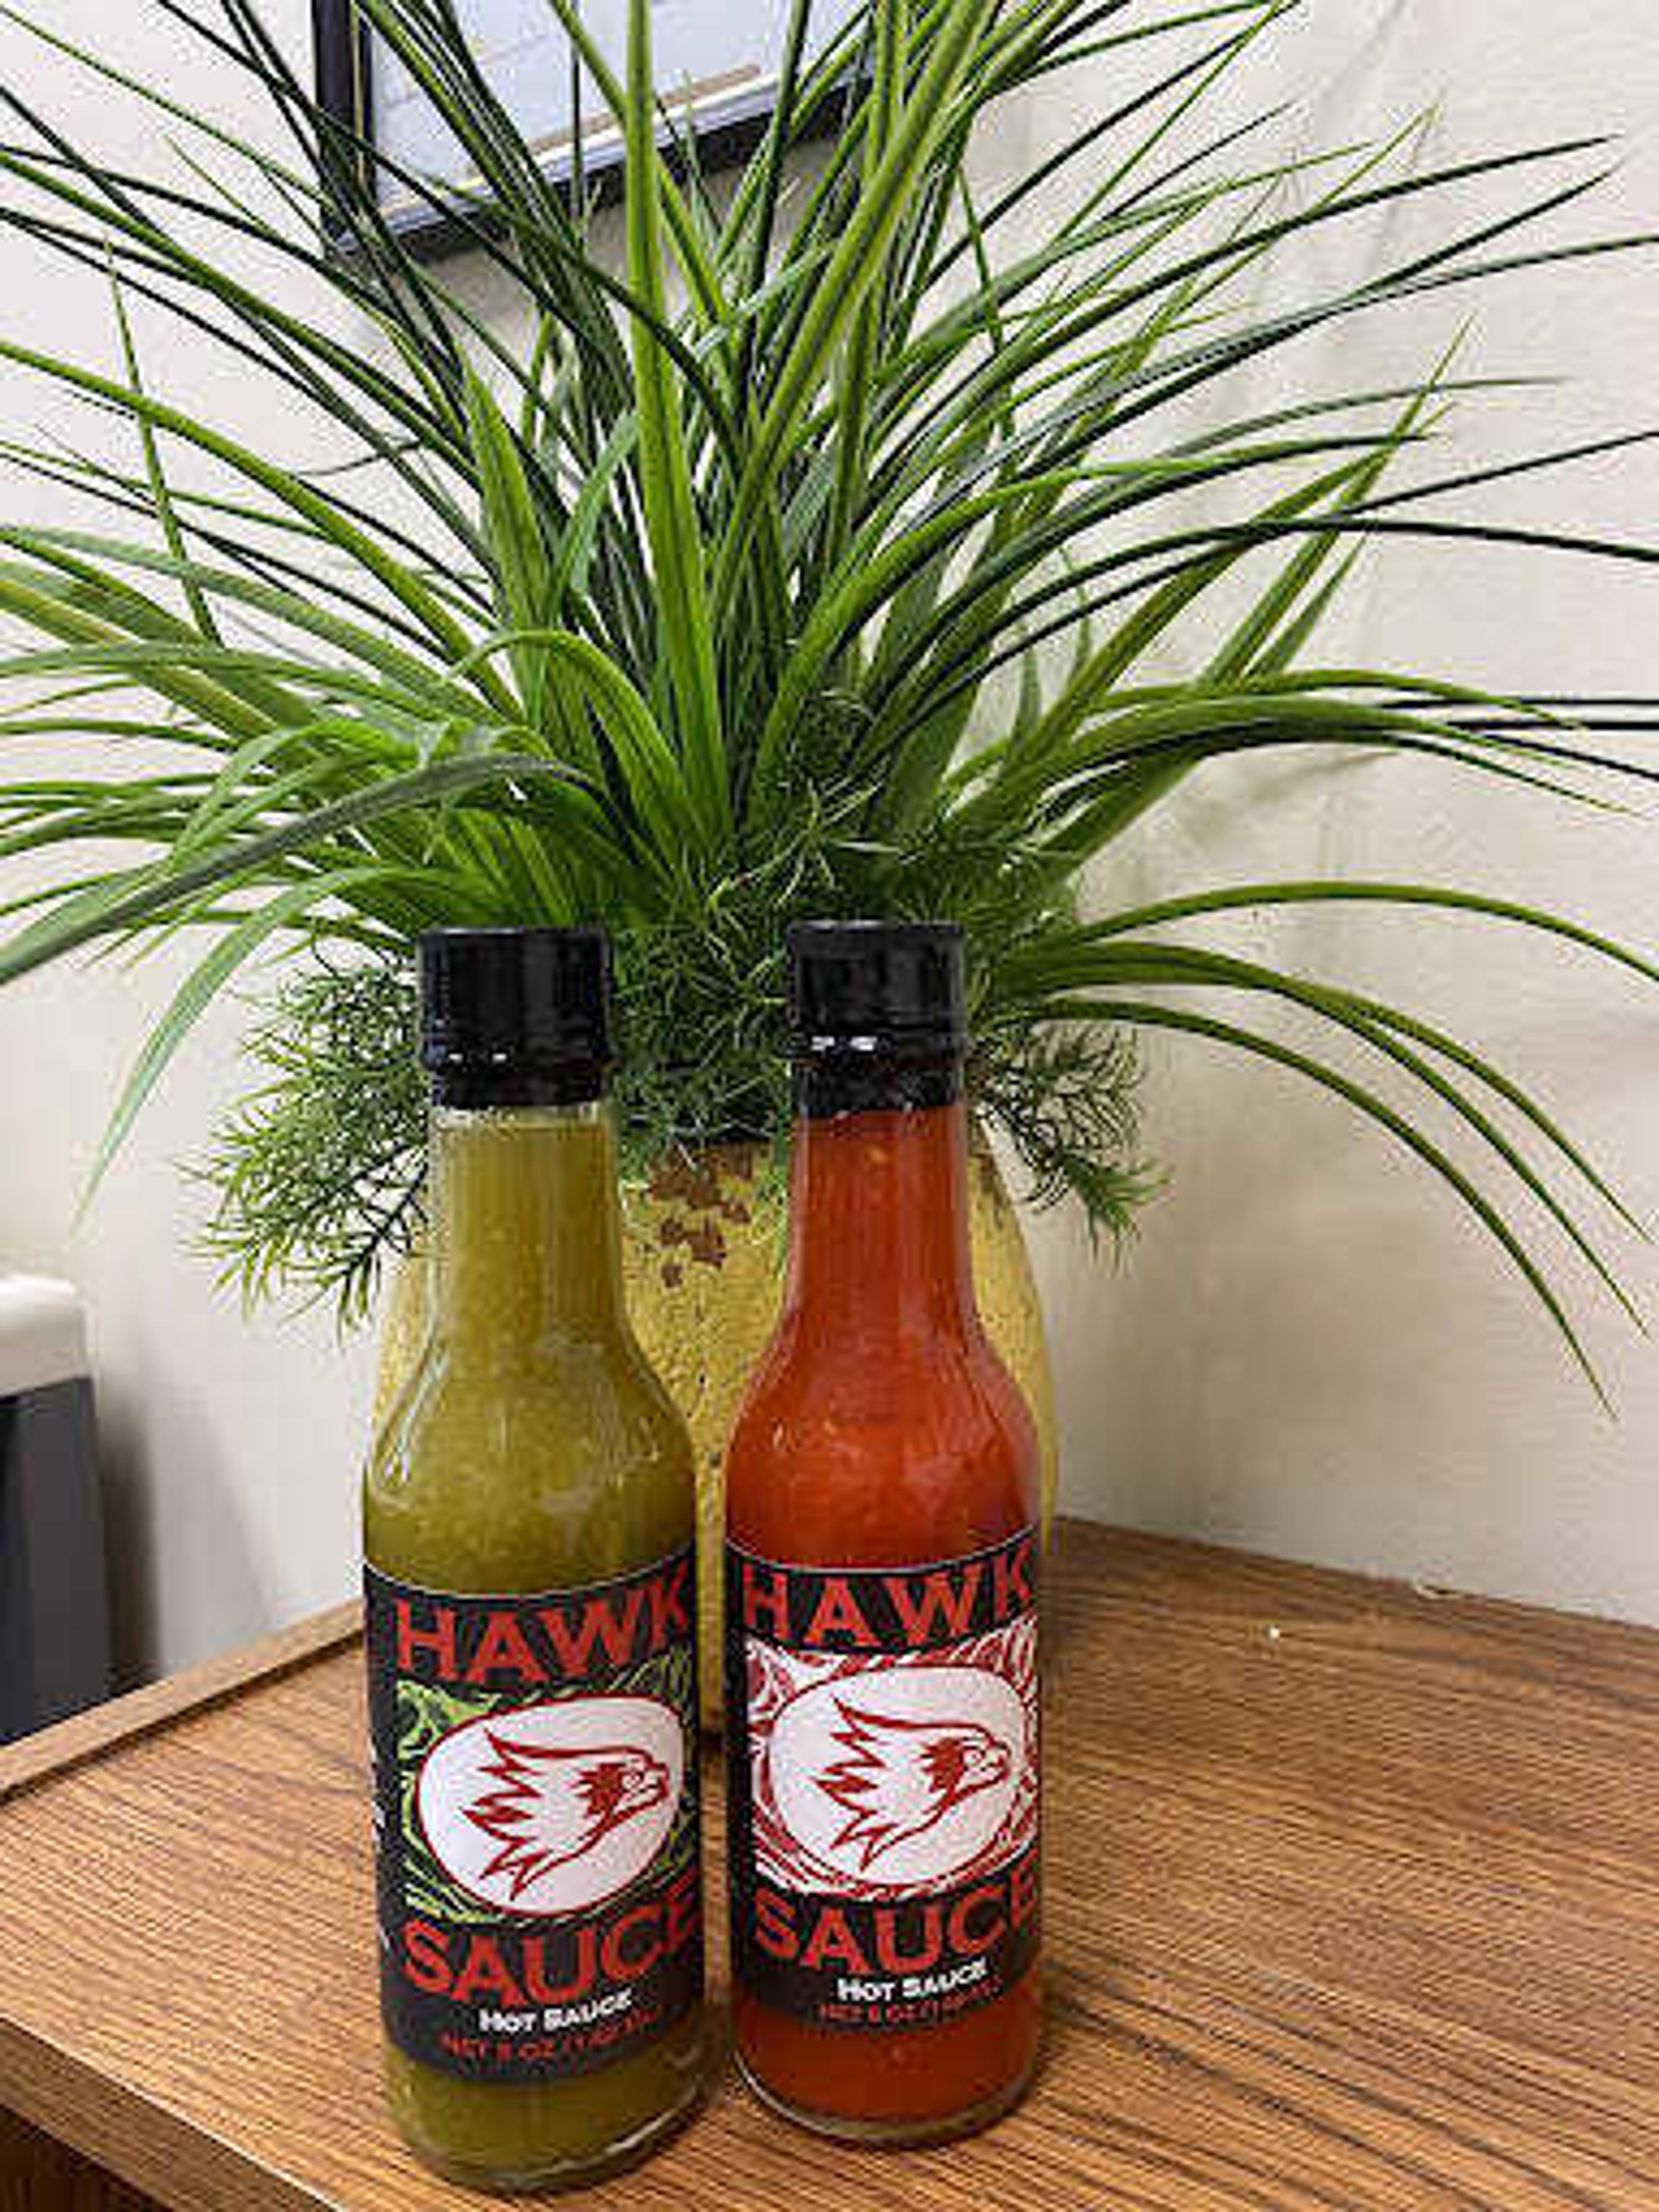 Hawk Sauce, created by hospitality management students, are available at Catapult Creative House. They decided to add the green option in 2020, and have since tested the product's shelf life.